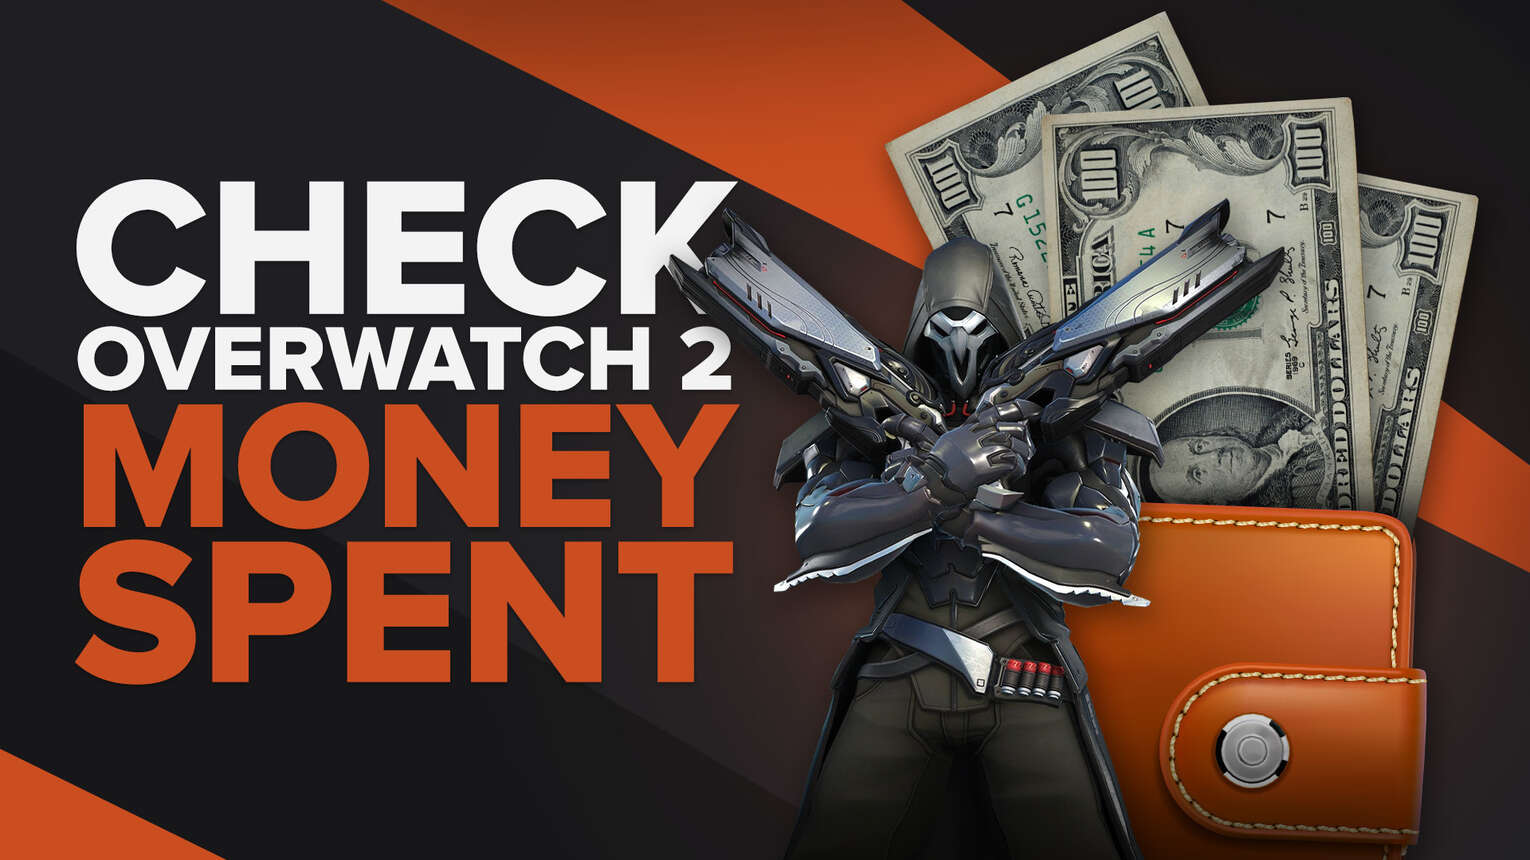 Check How Much Money You Have Spent on Overwatch!